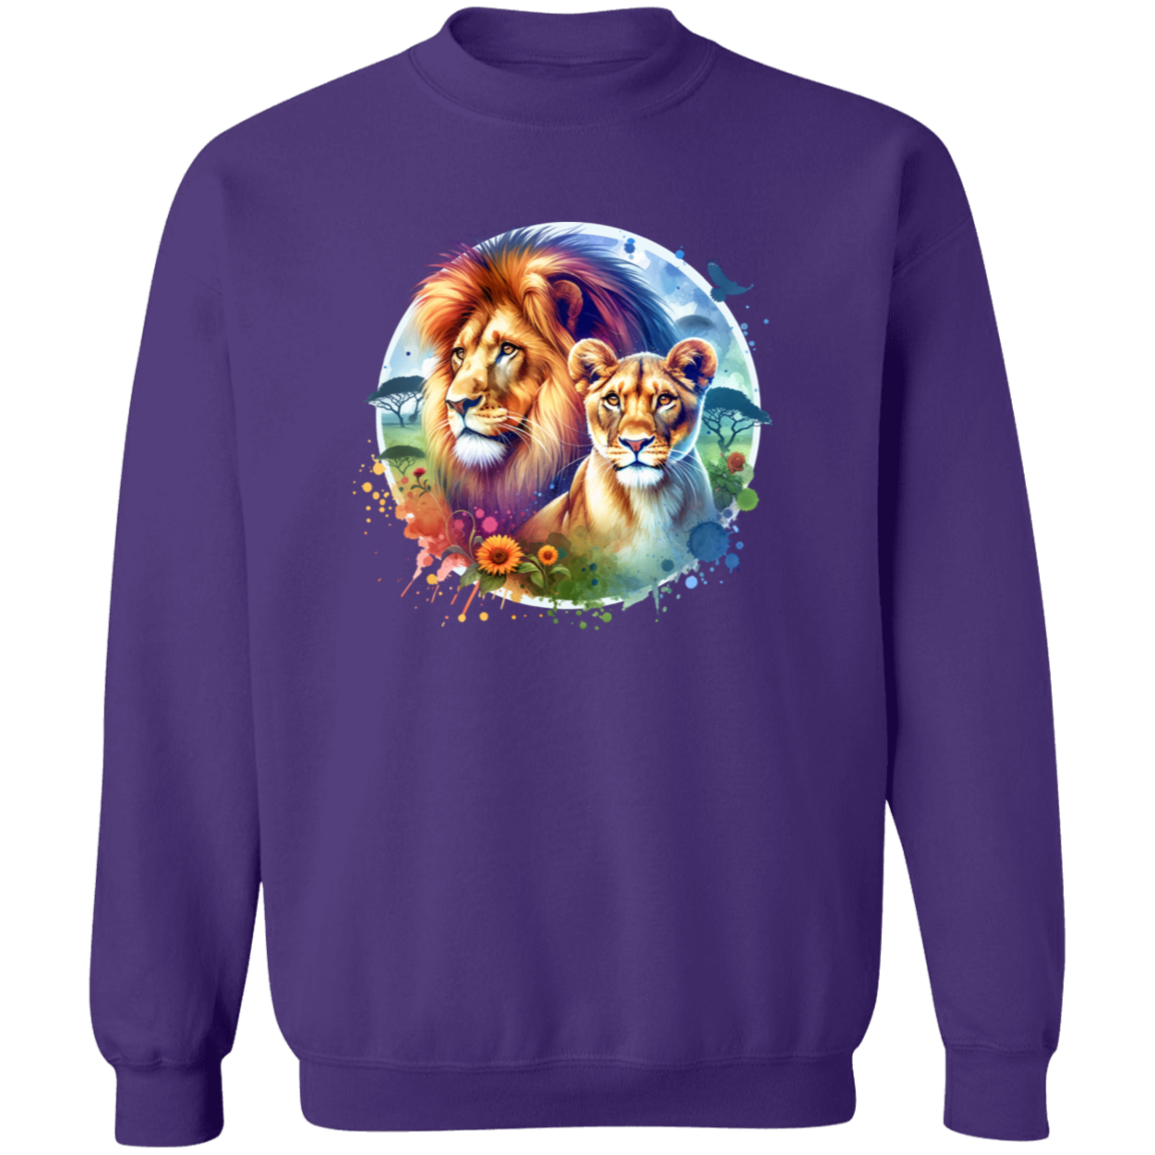 Lion and Lioness Watercolor - T-shirts, Hoodies and Sweatshirts